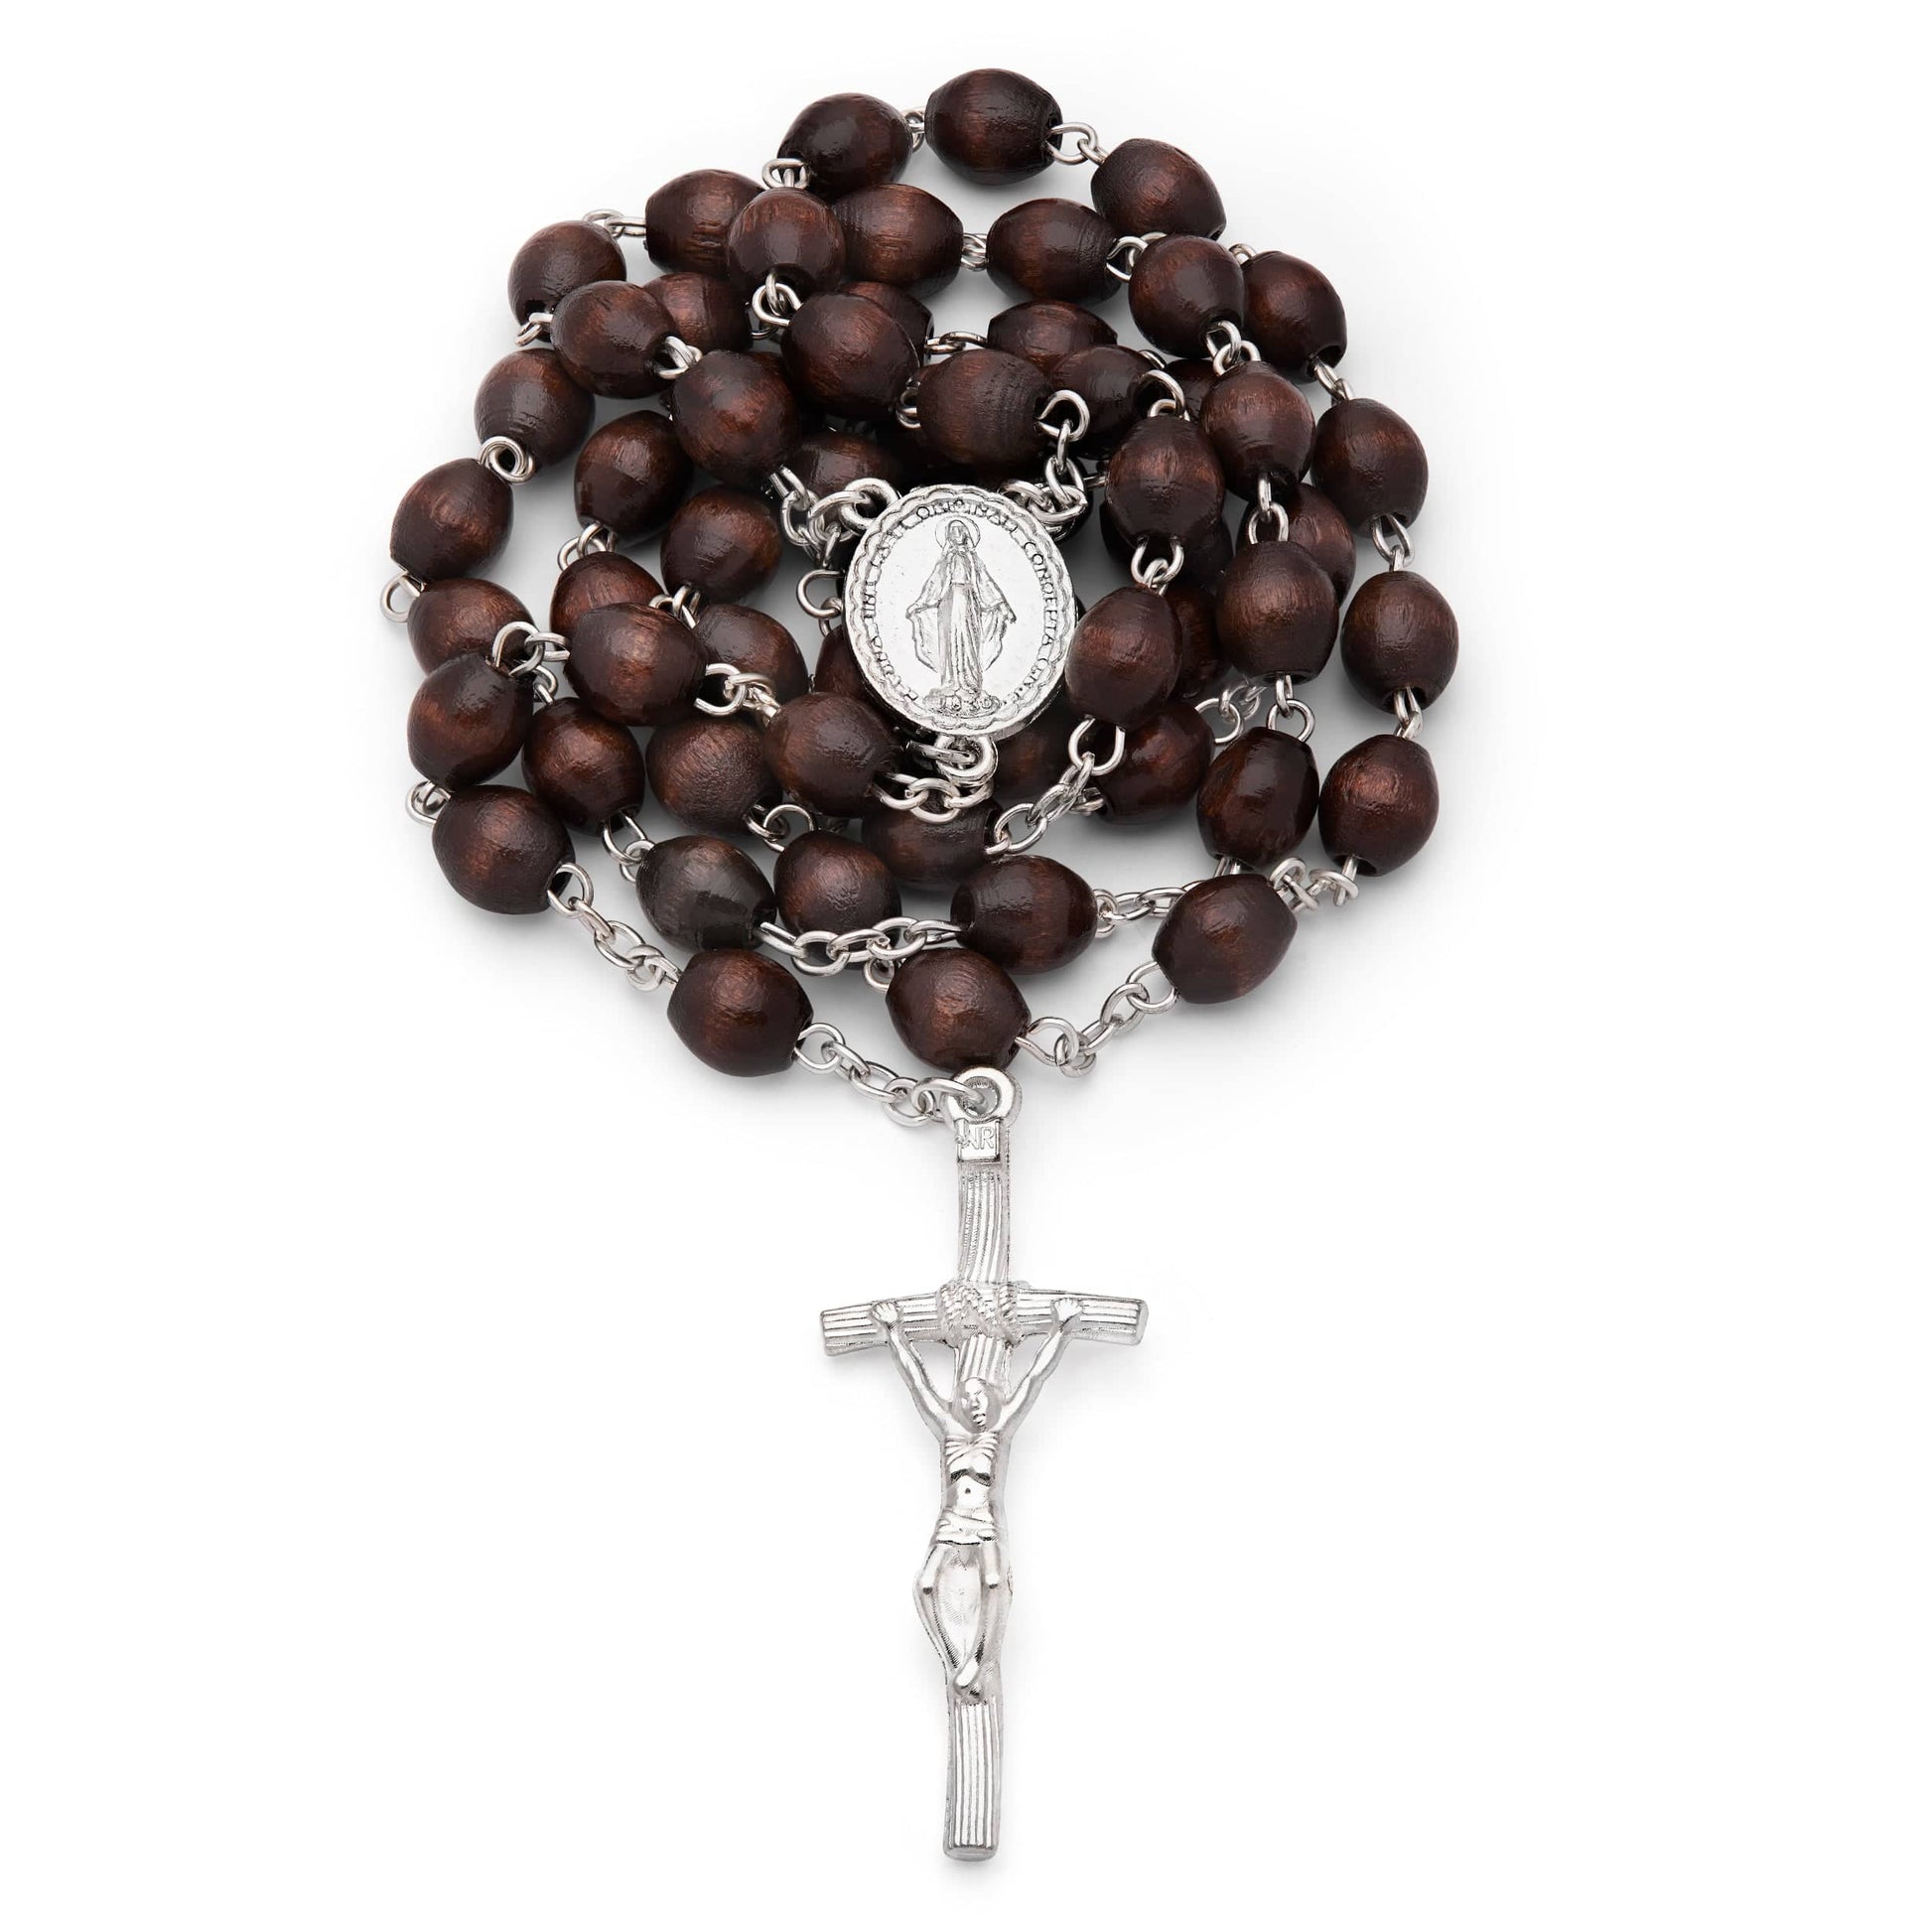 MONDO CATTOLICO Prayer Beads 53 cm (20.90 in) / 7 mm (0.30 in) Pope Francis Brown Case and Rosary